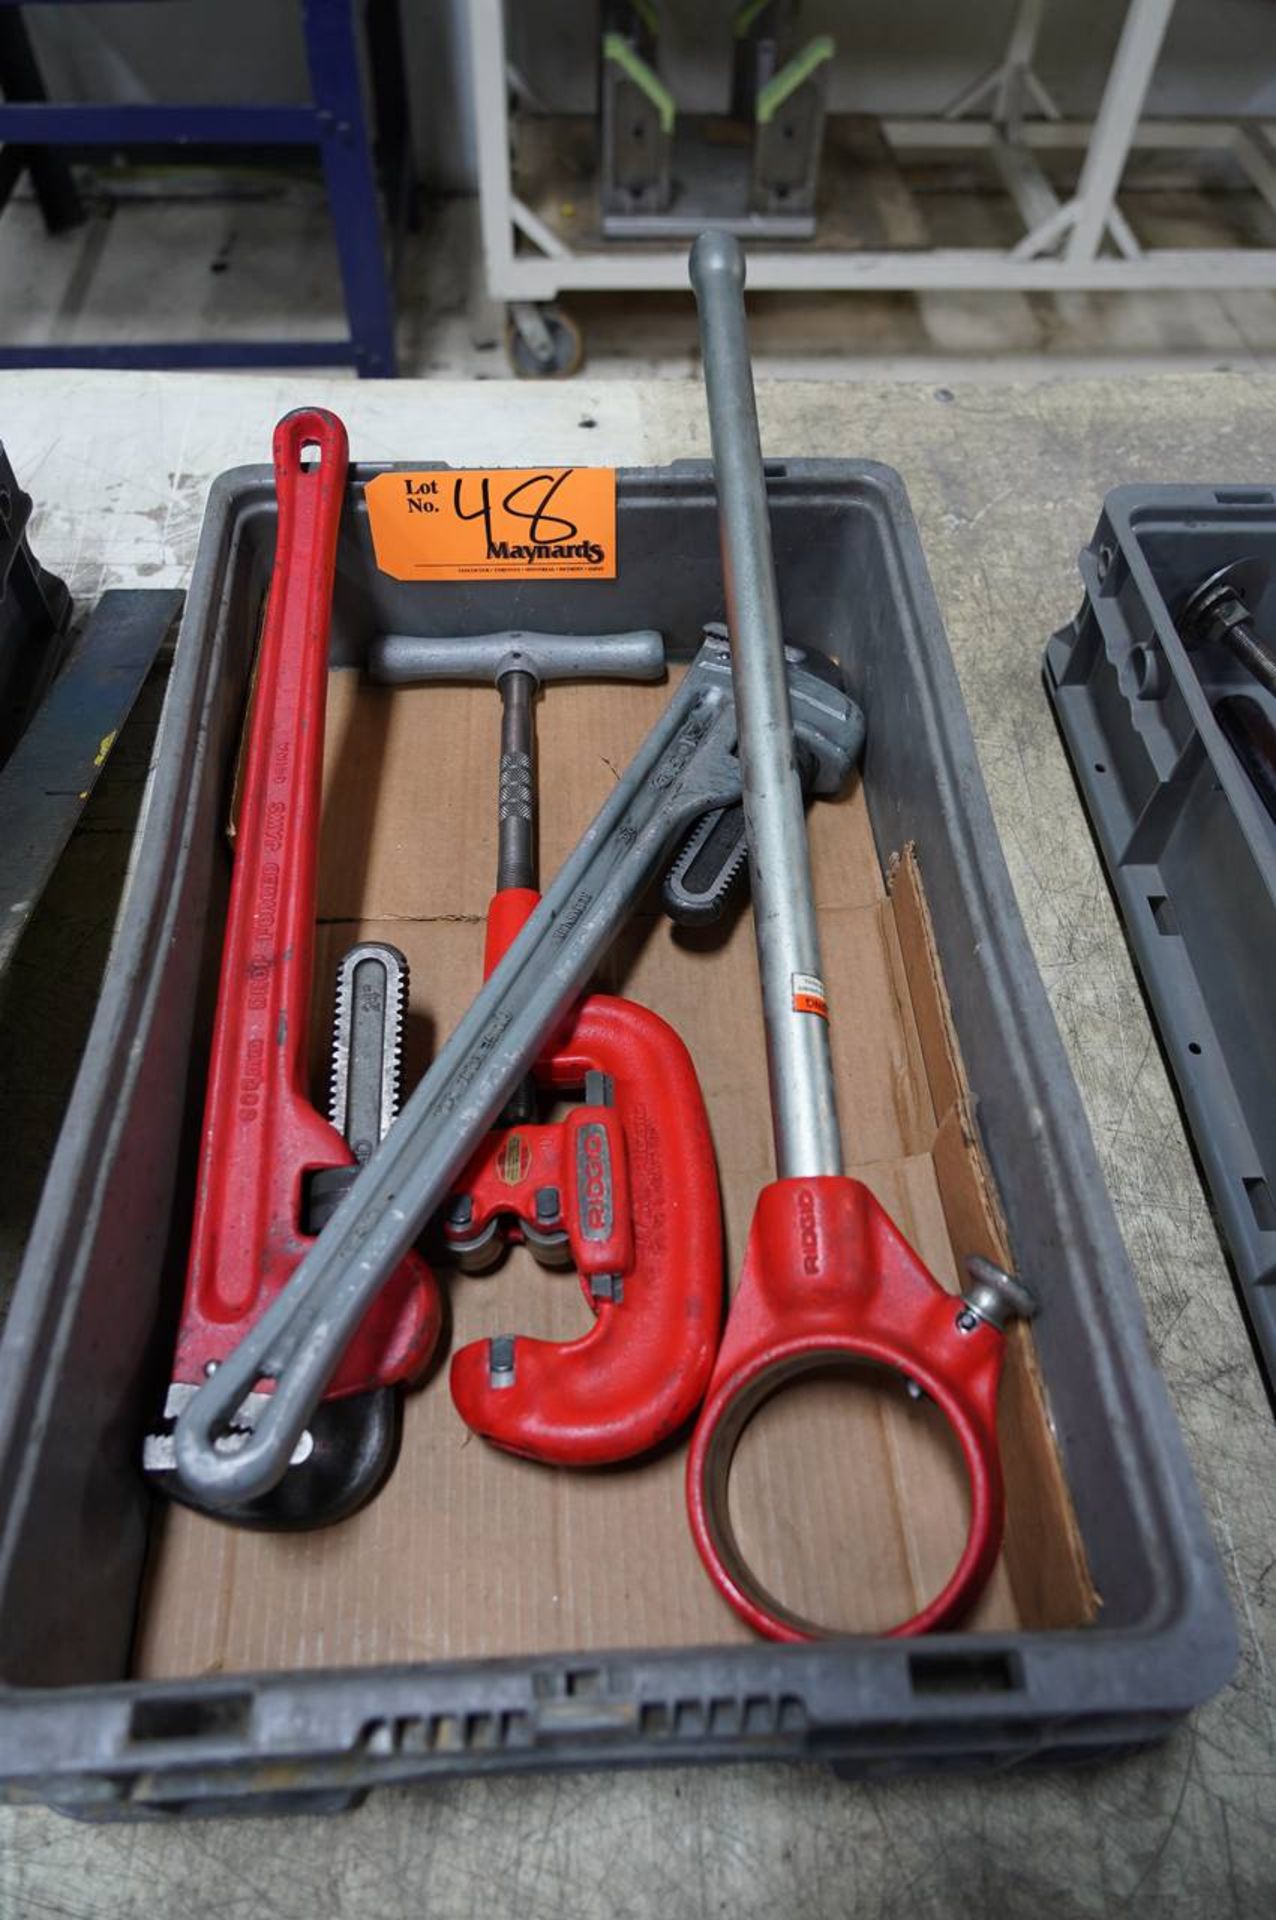 Rigid (2) Pipe Wrenches,